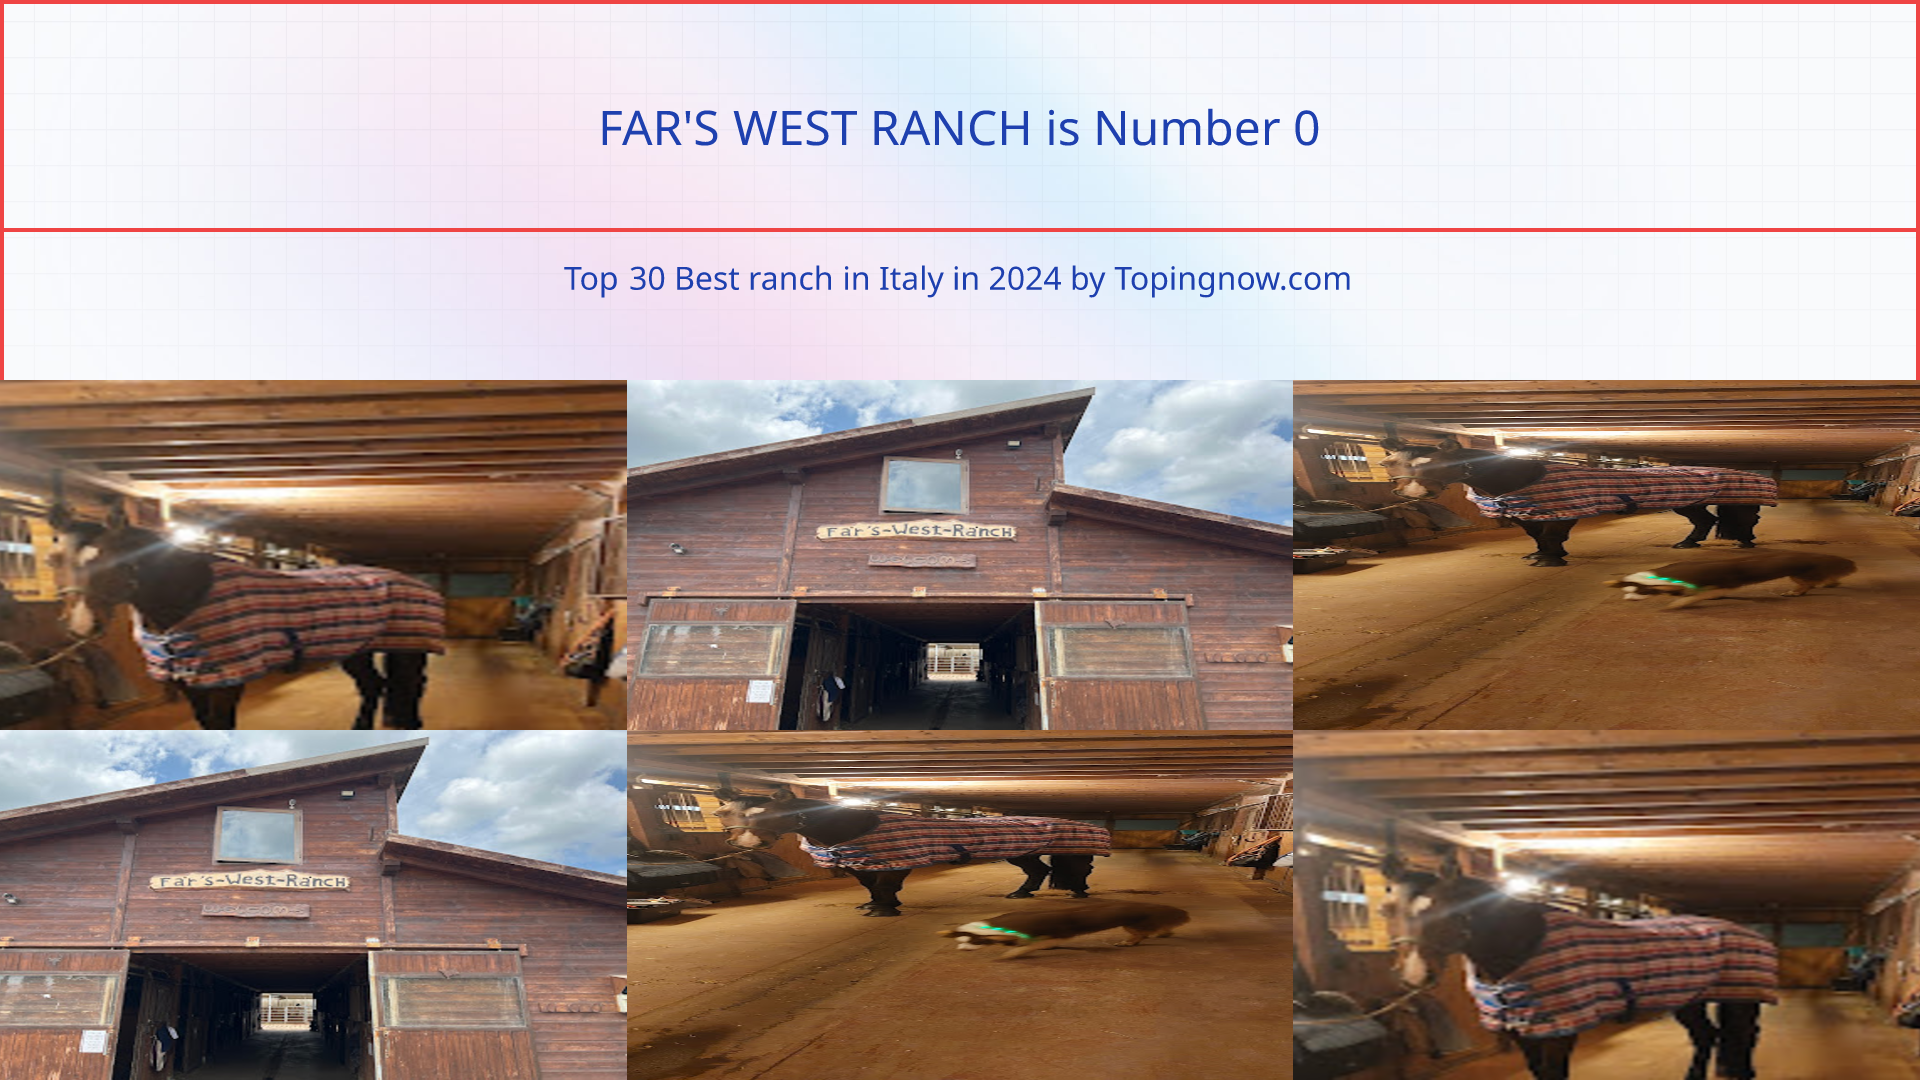 FAR'S WEST RANCH: Top 30 Best ranch in Italy in 2024